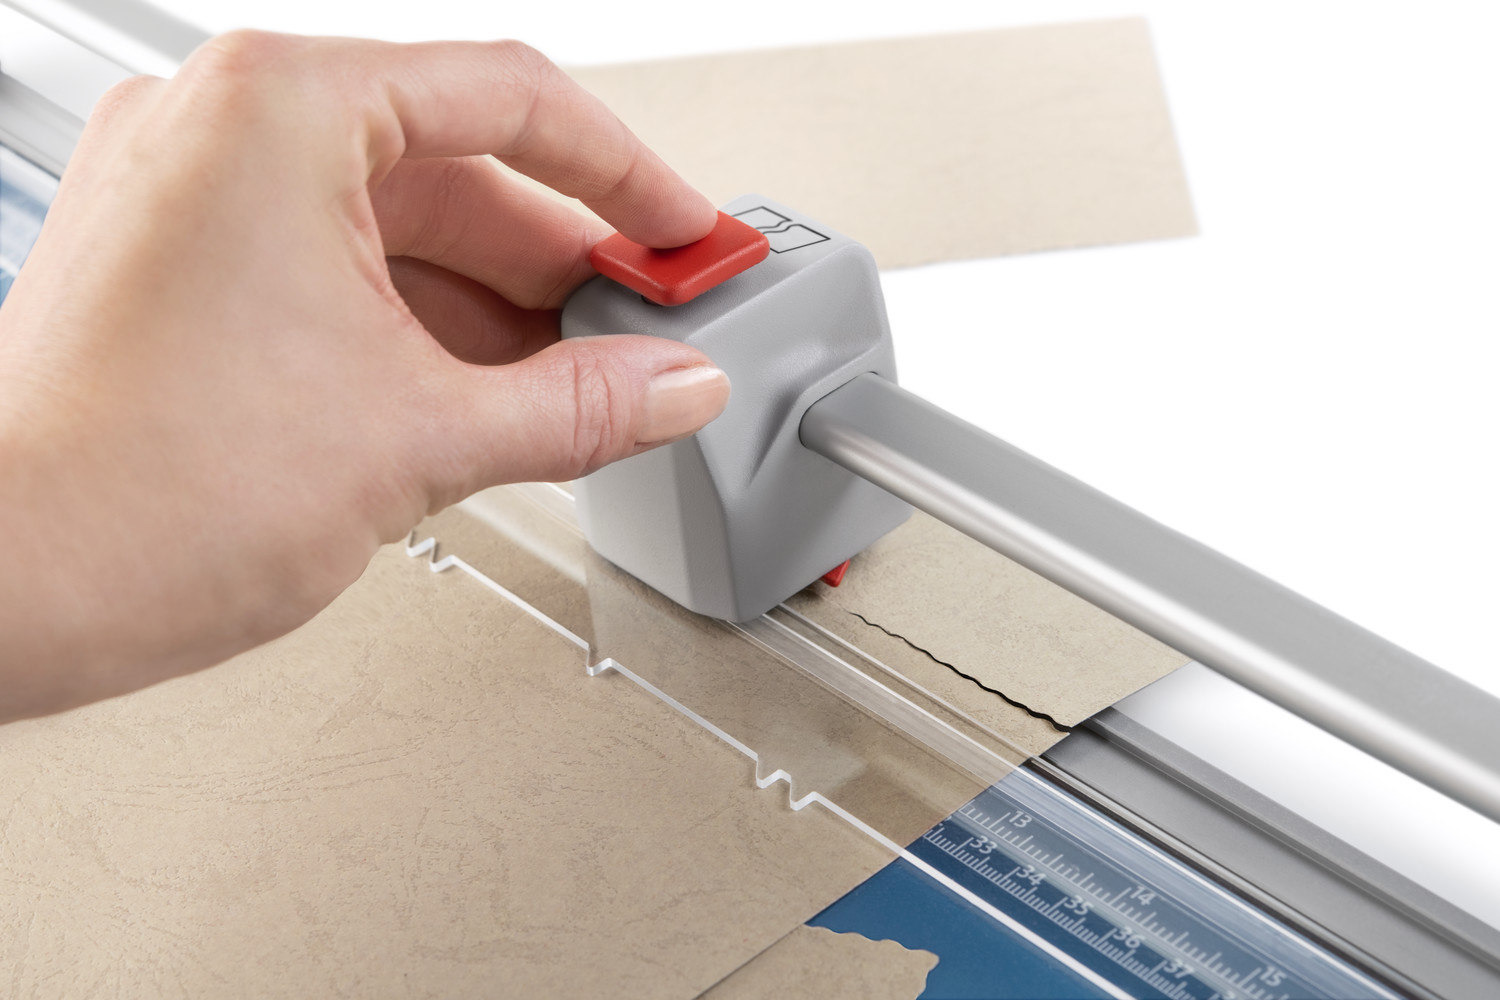 Get creative: take your crafts to the next level with deckle cut